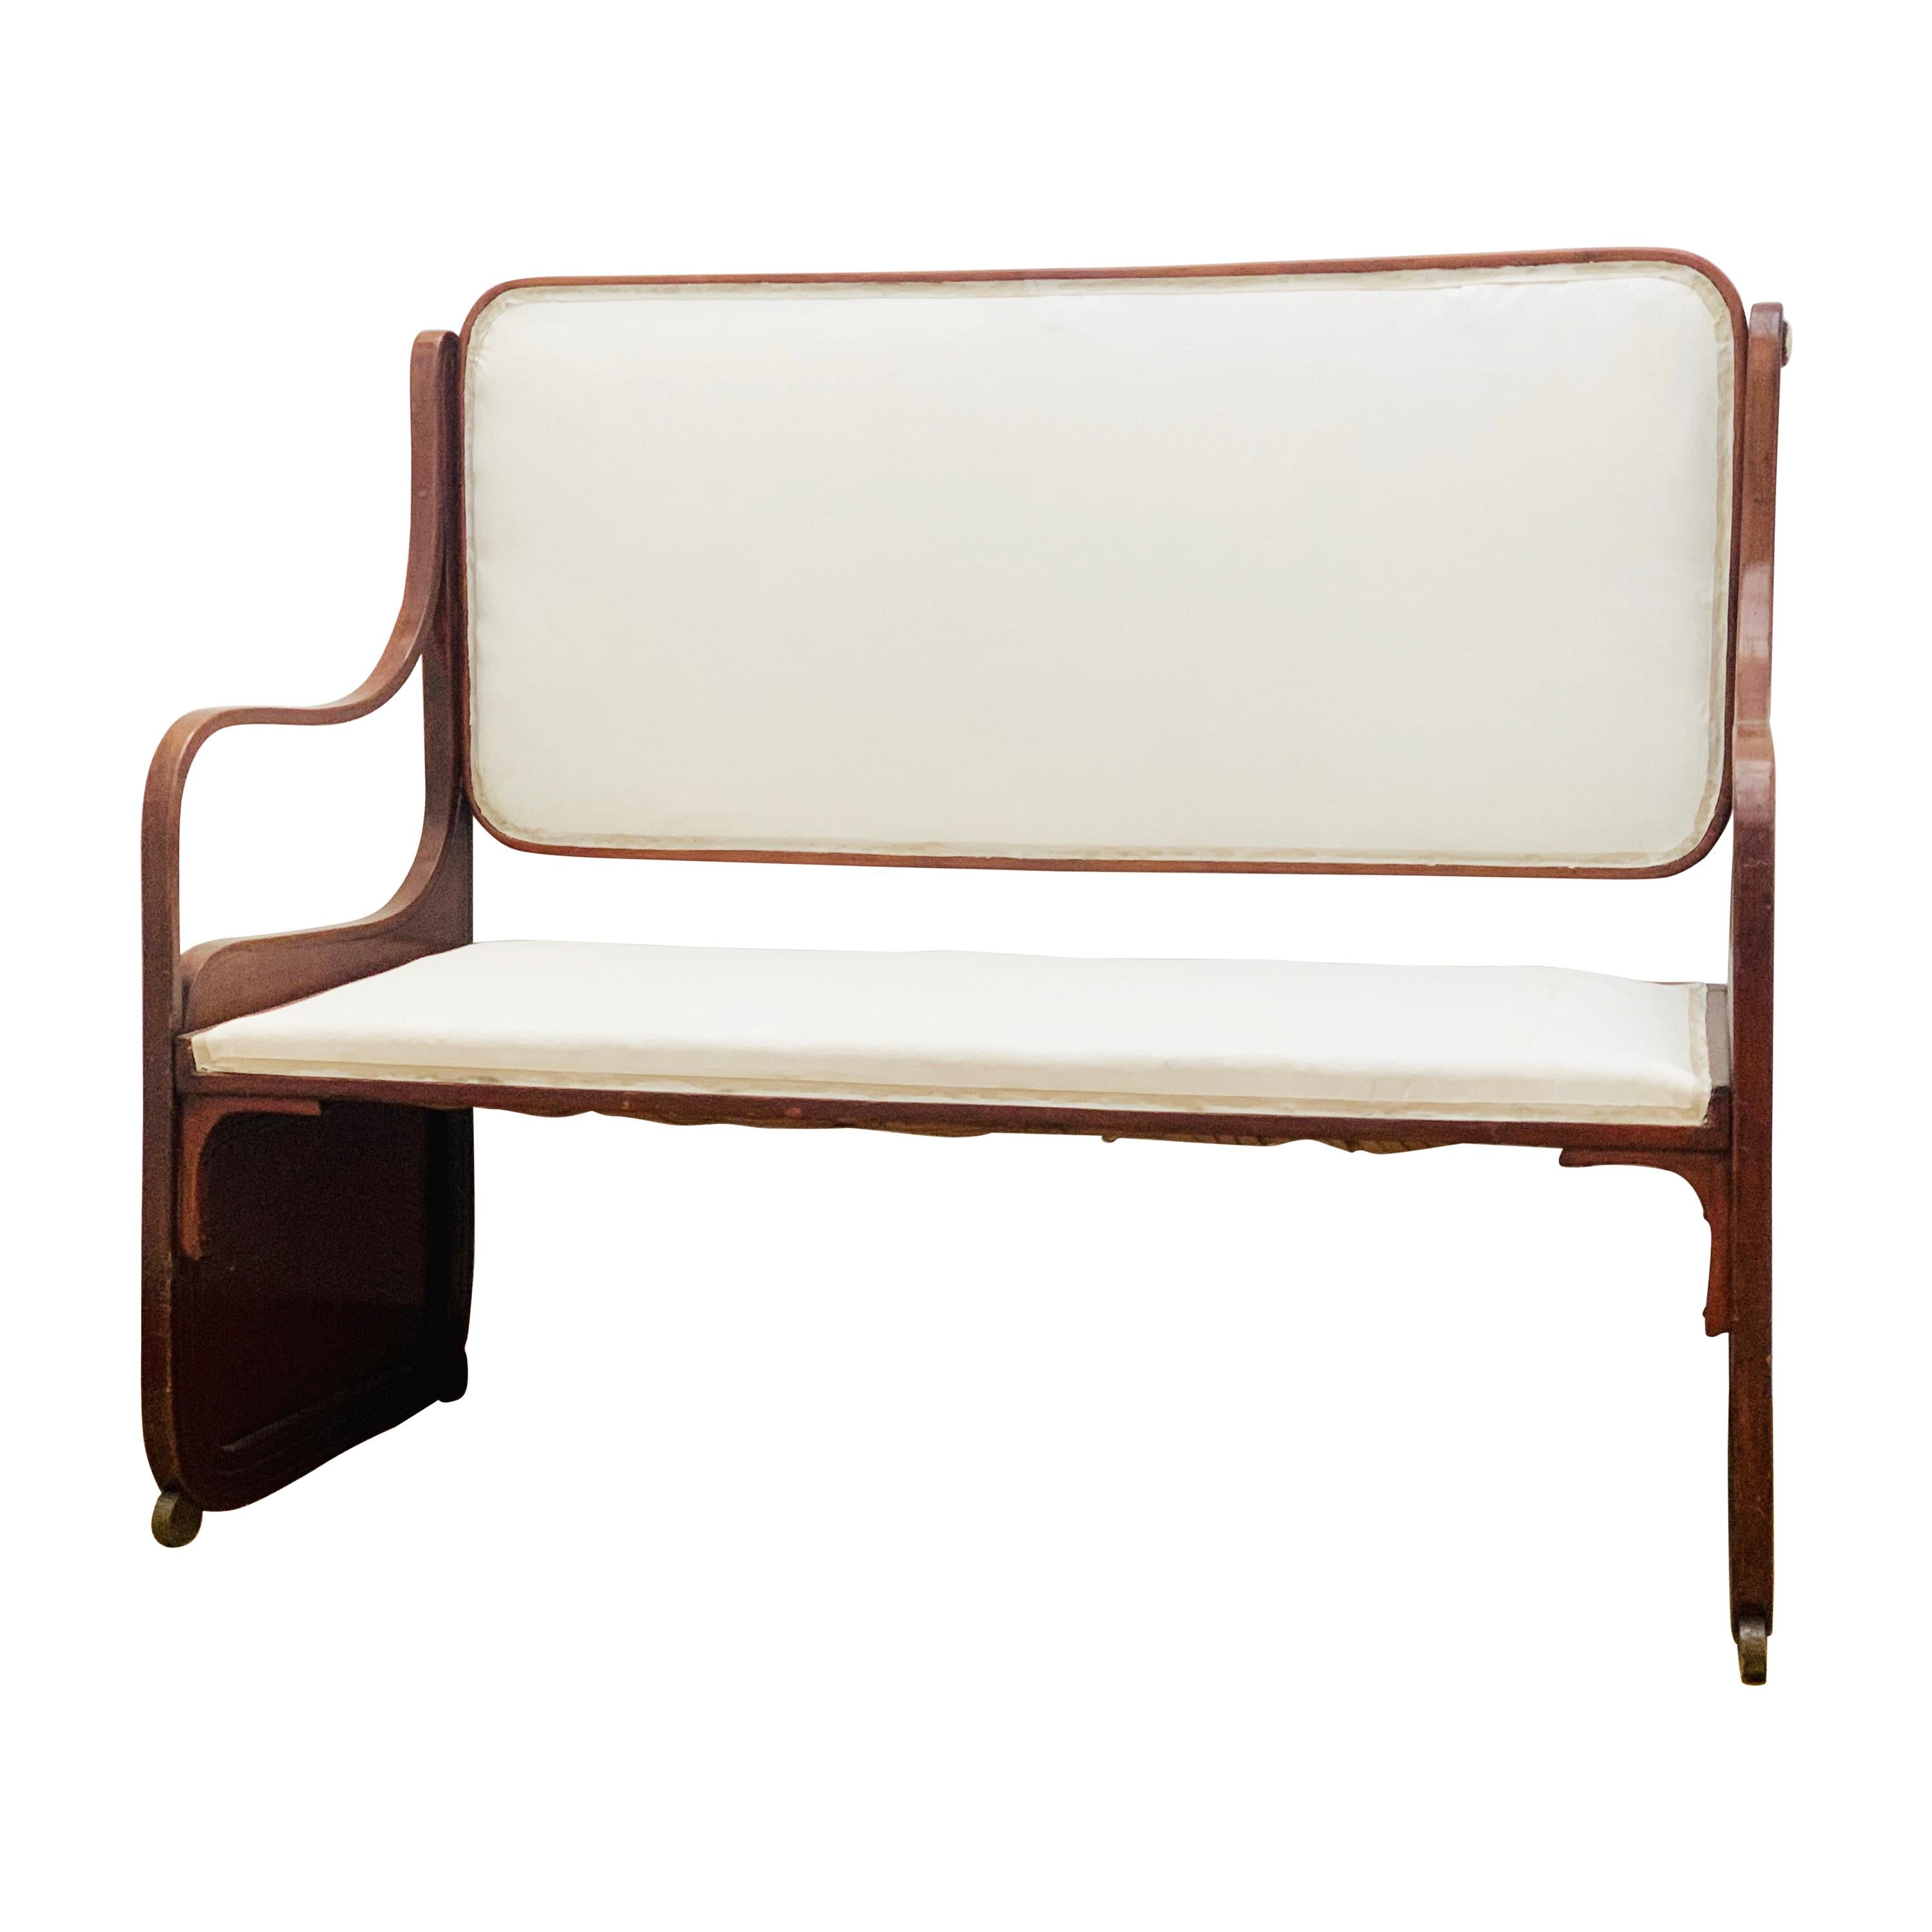 Bentwood Bench by Koloman Moser, Viennese Secession, circa 1900 For Sale